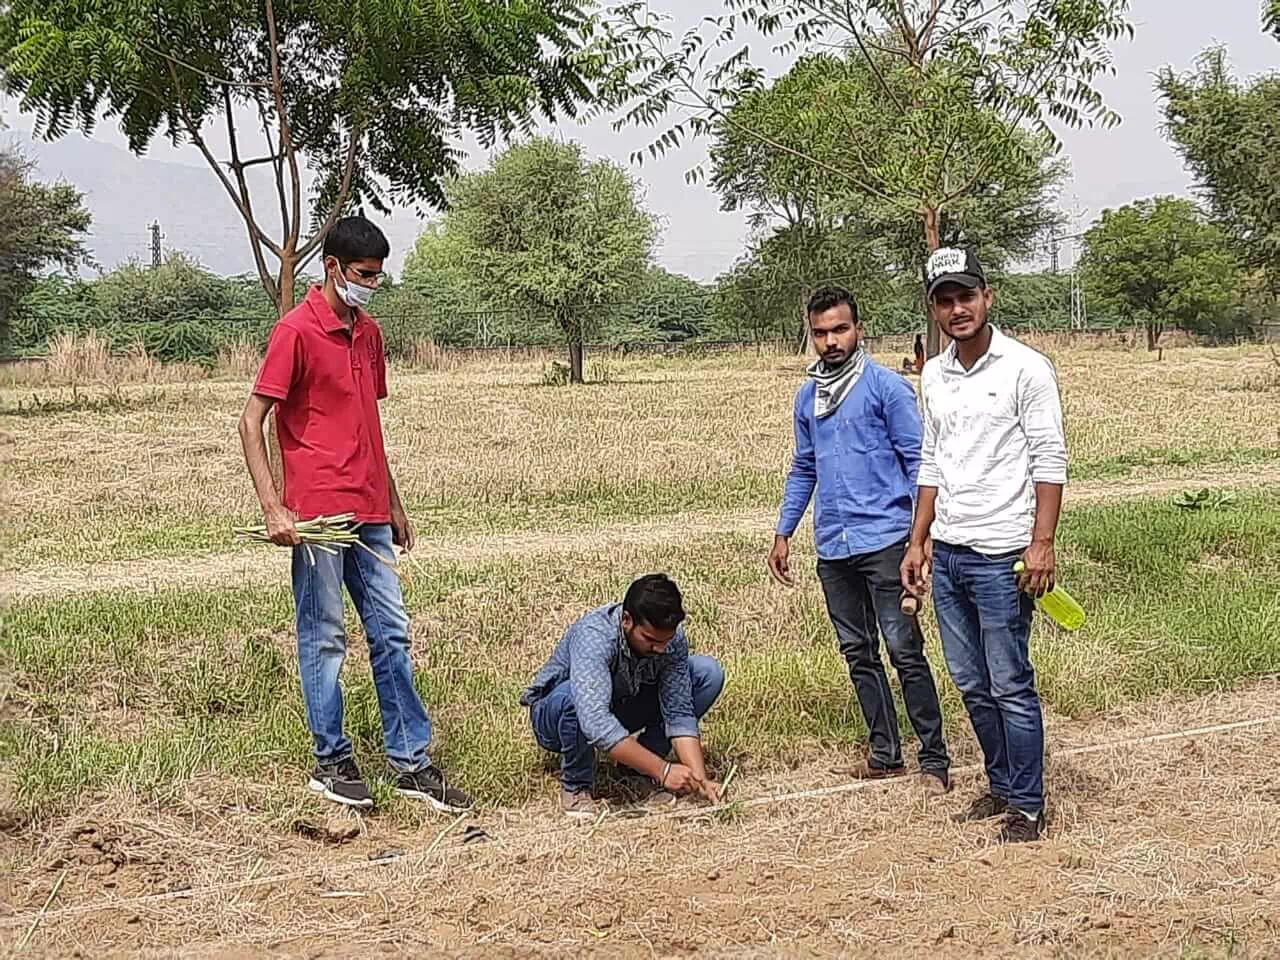 TRAINING ON RURAL AGRICULTURAL WORK EXPERIENCE AT KVK AJMER